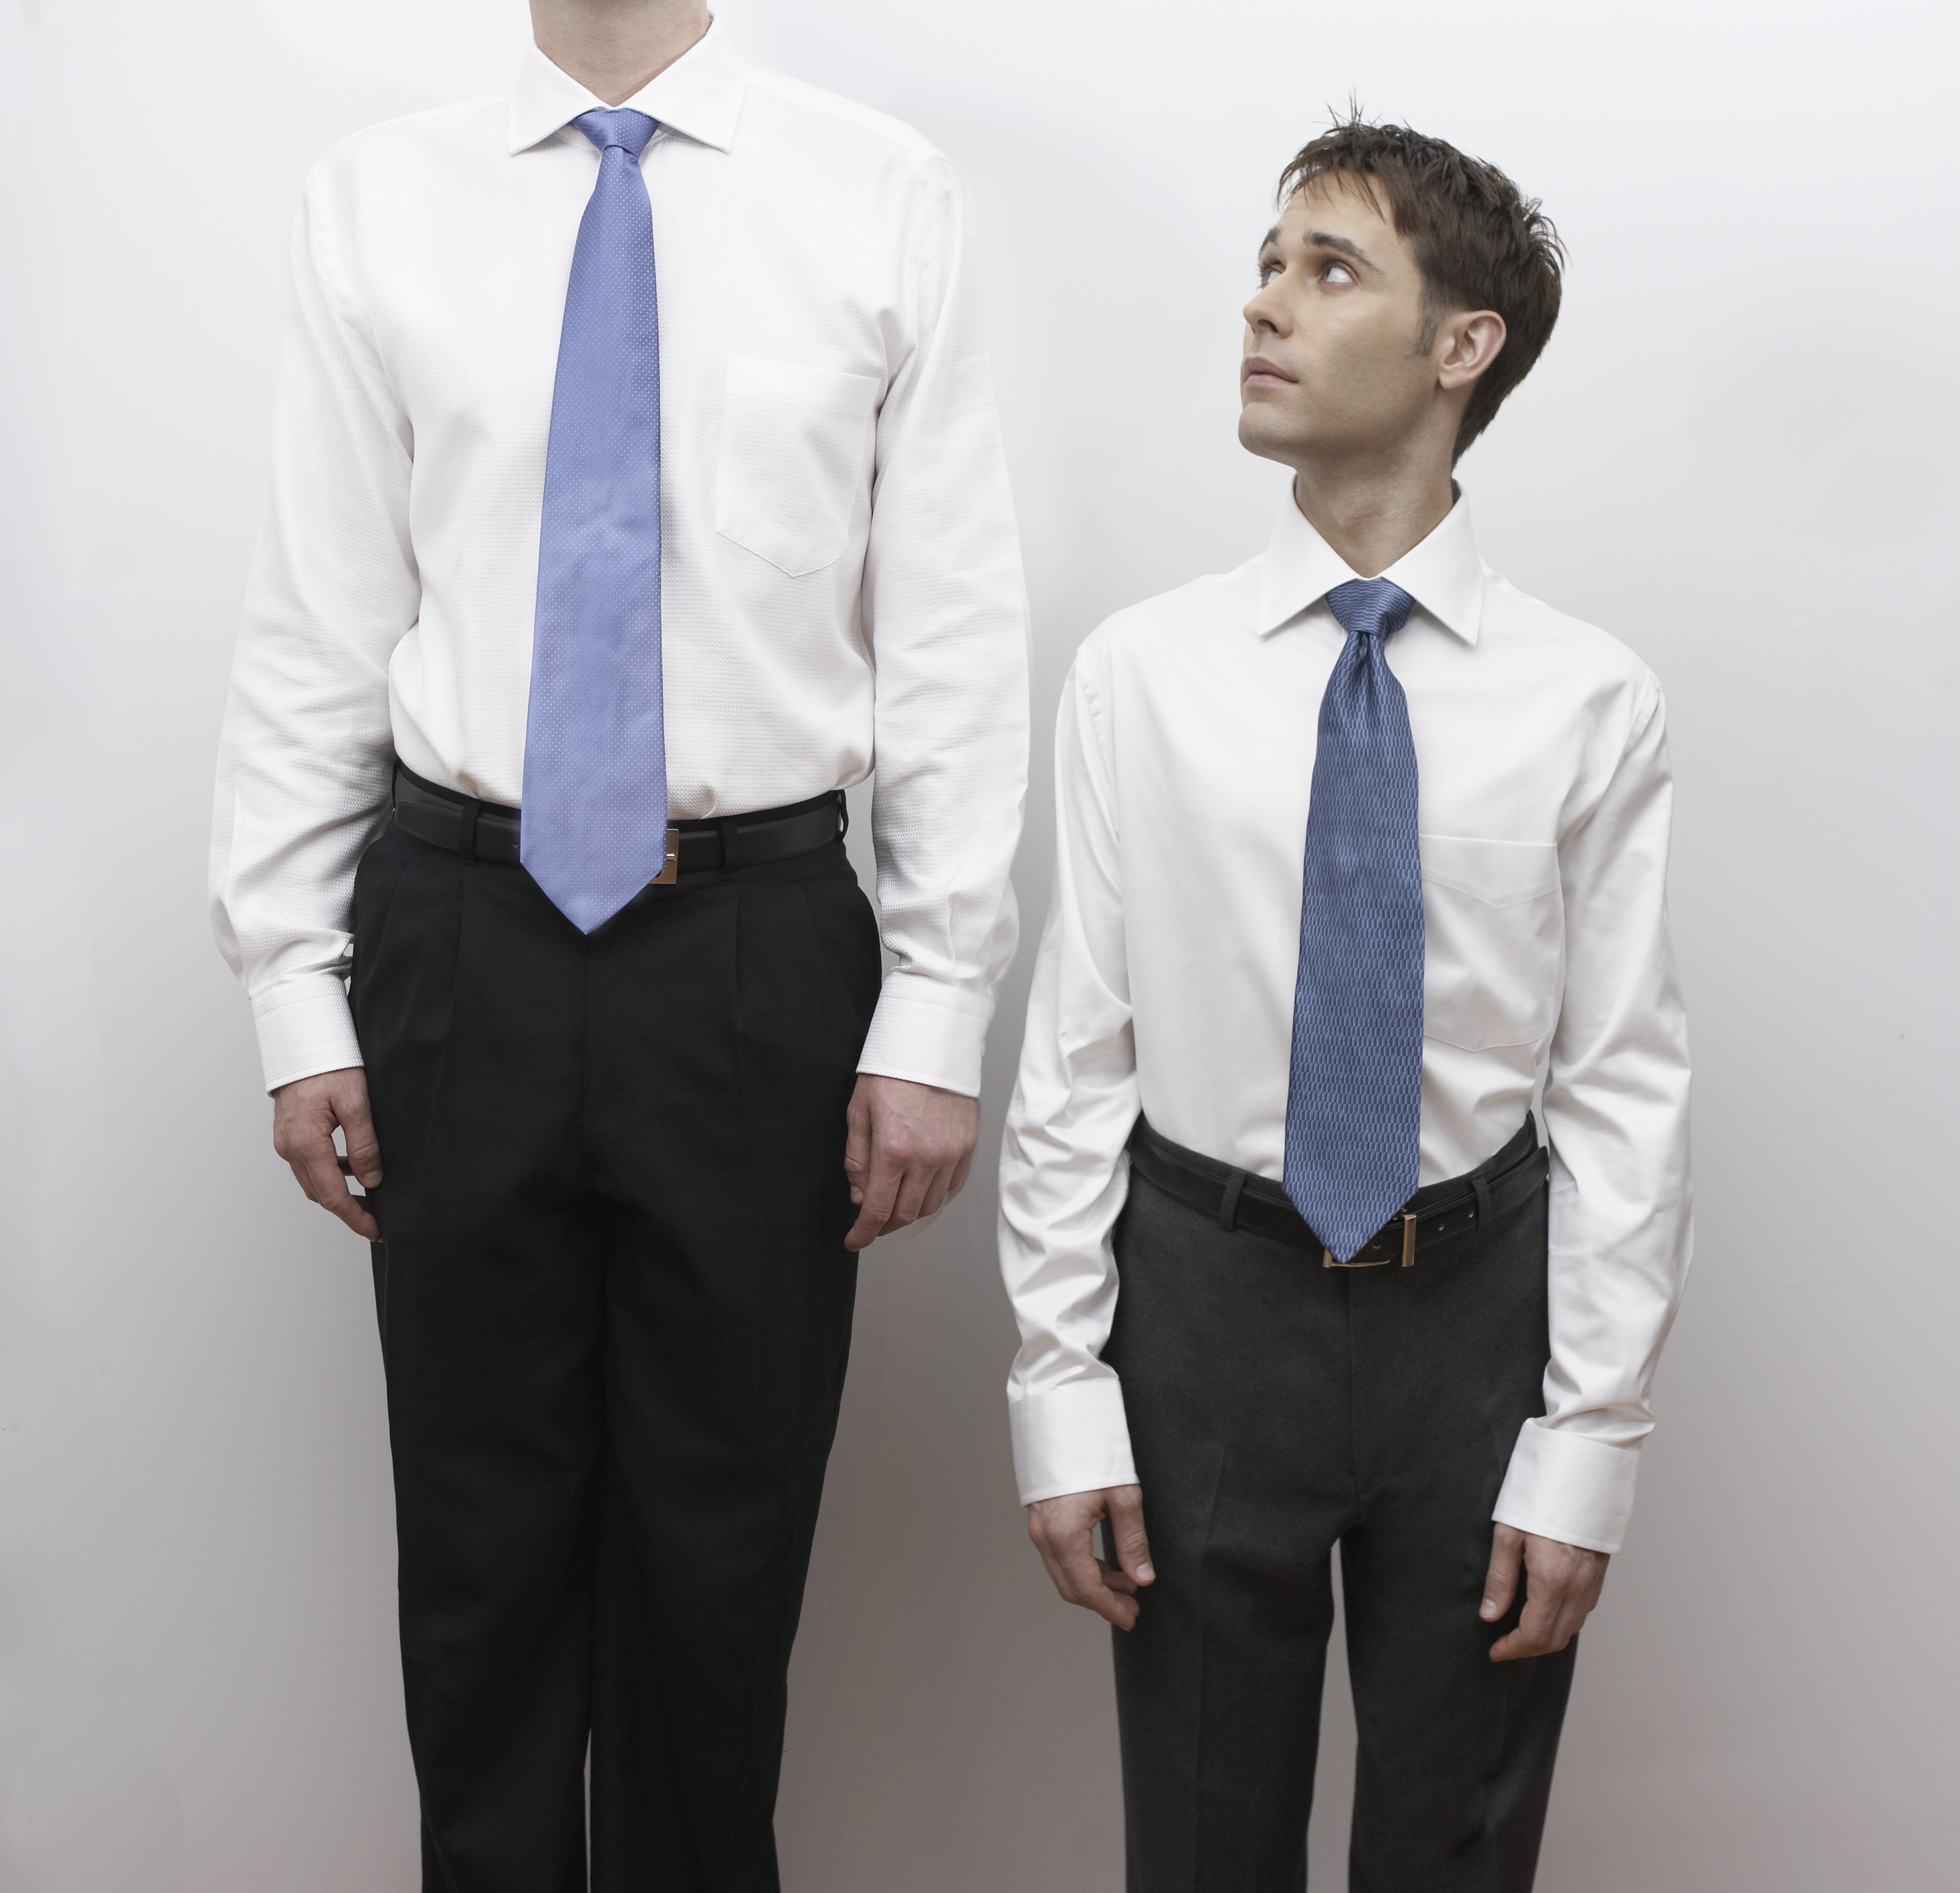 Shorter People More At Risk From Heart Disease Study Time